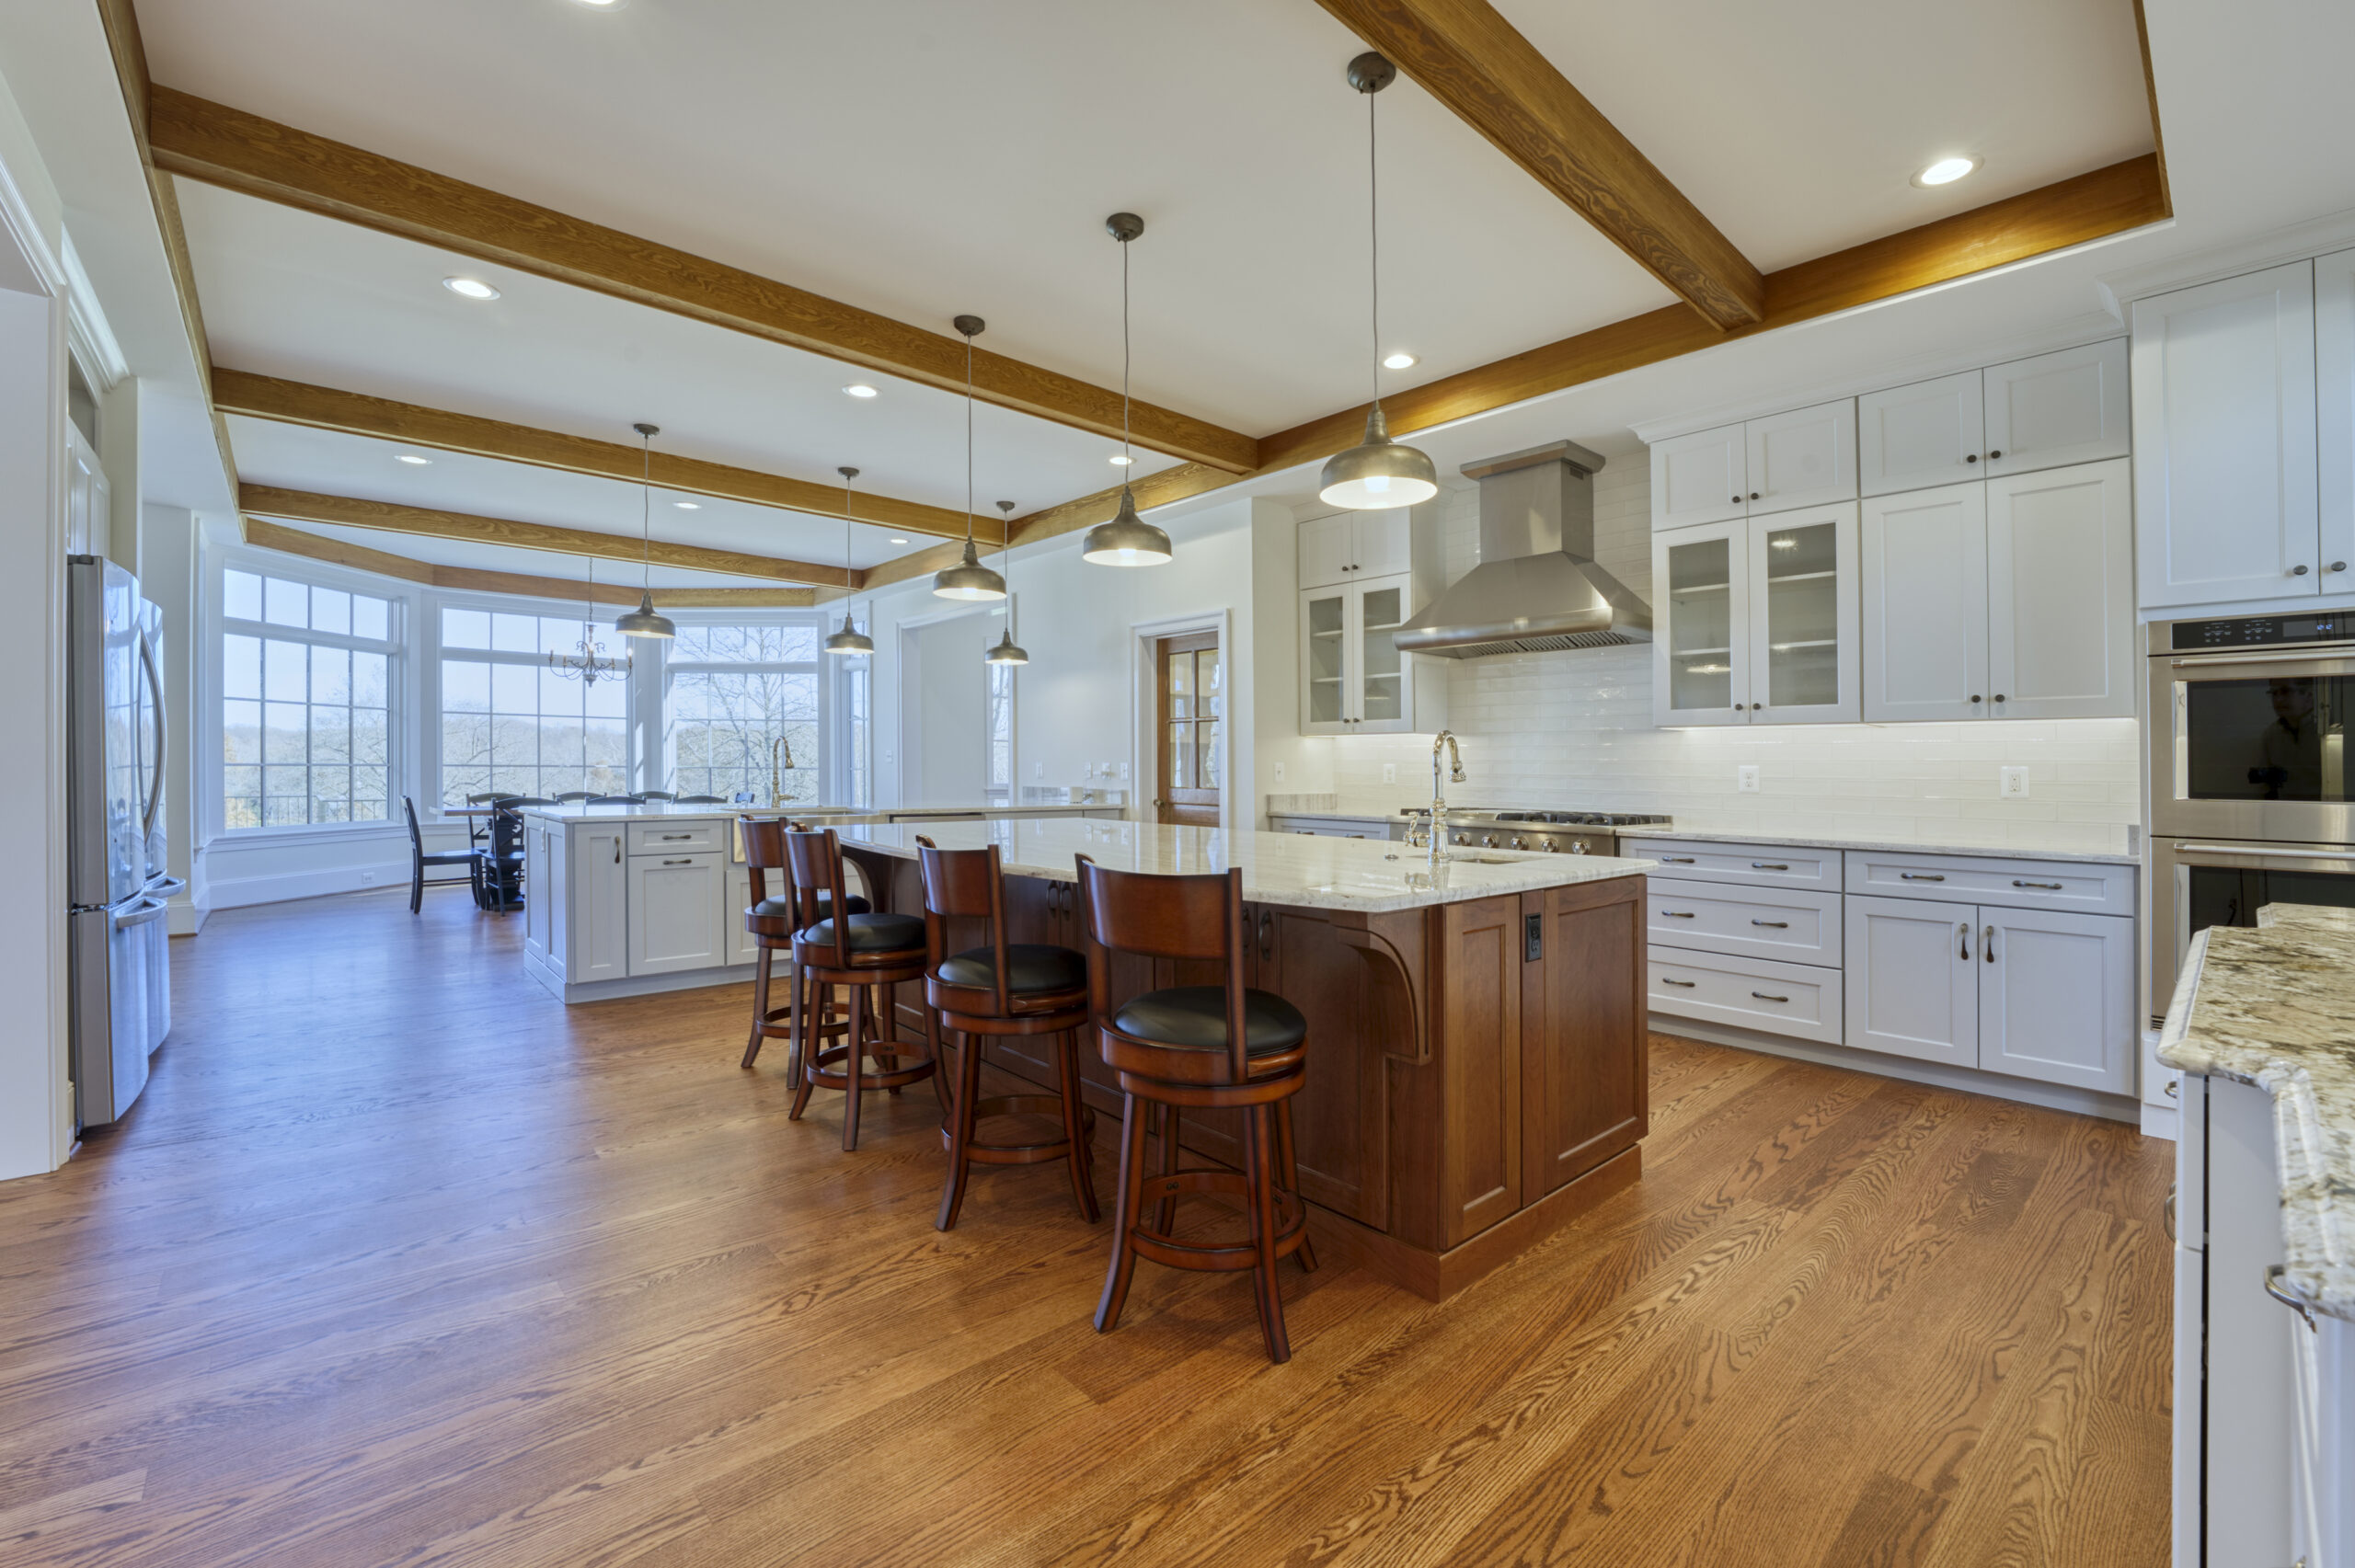 Professional interior photo of custom build new home by Black Oak Construction - showing the kitchen with exposed wood beams in the white ceiling, large island centered in front of the range with stainless hood, wrap around counters with stainless appliances and farmer's sink and hardwood floors